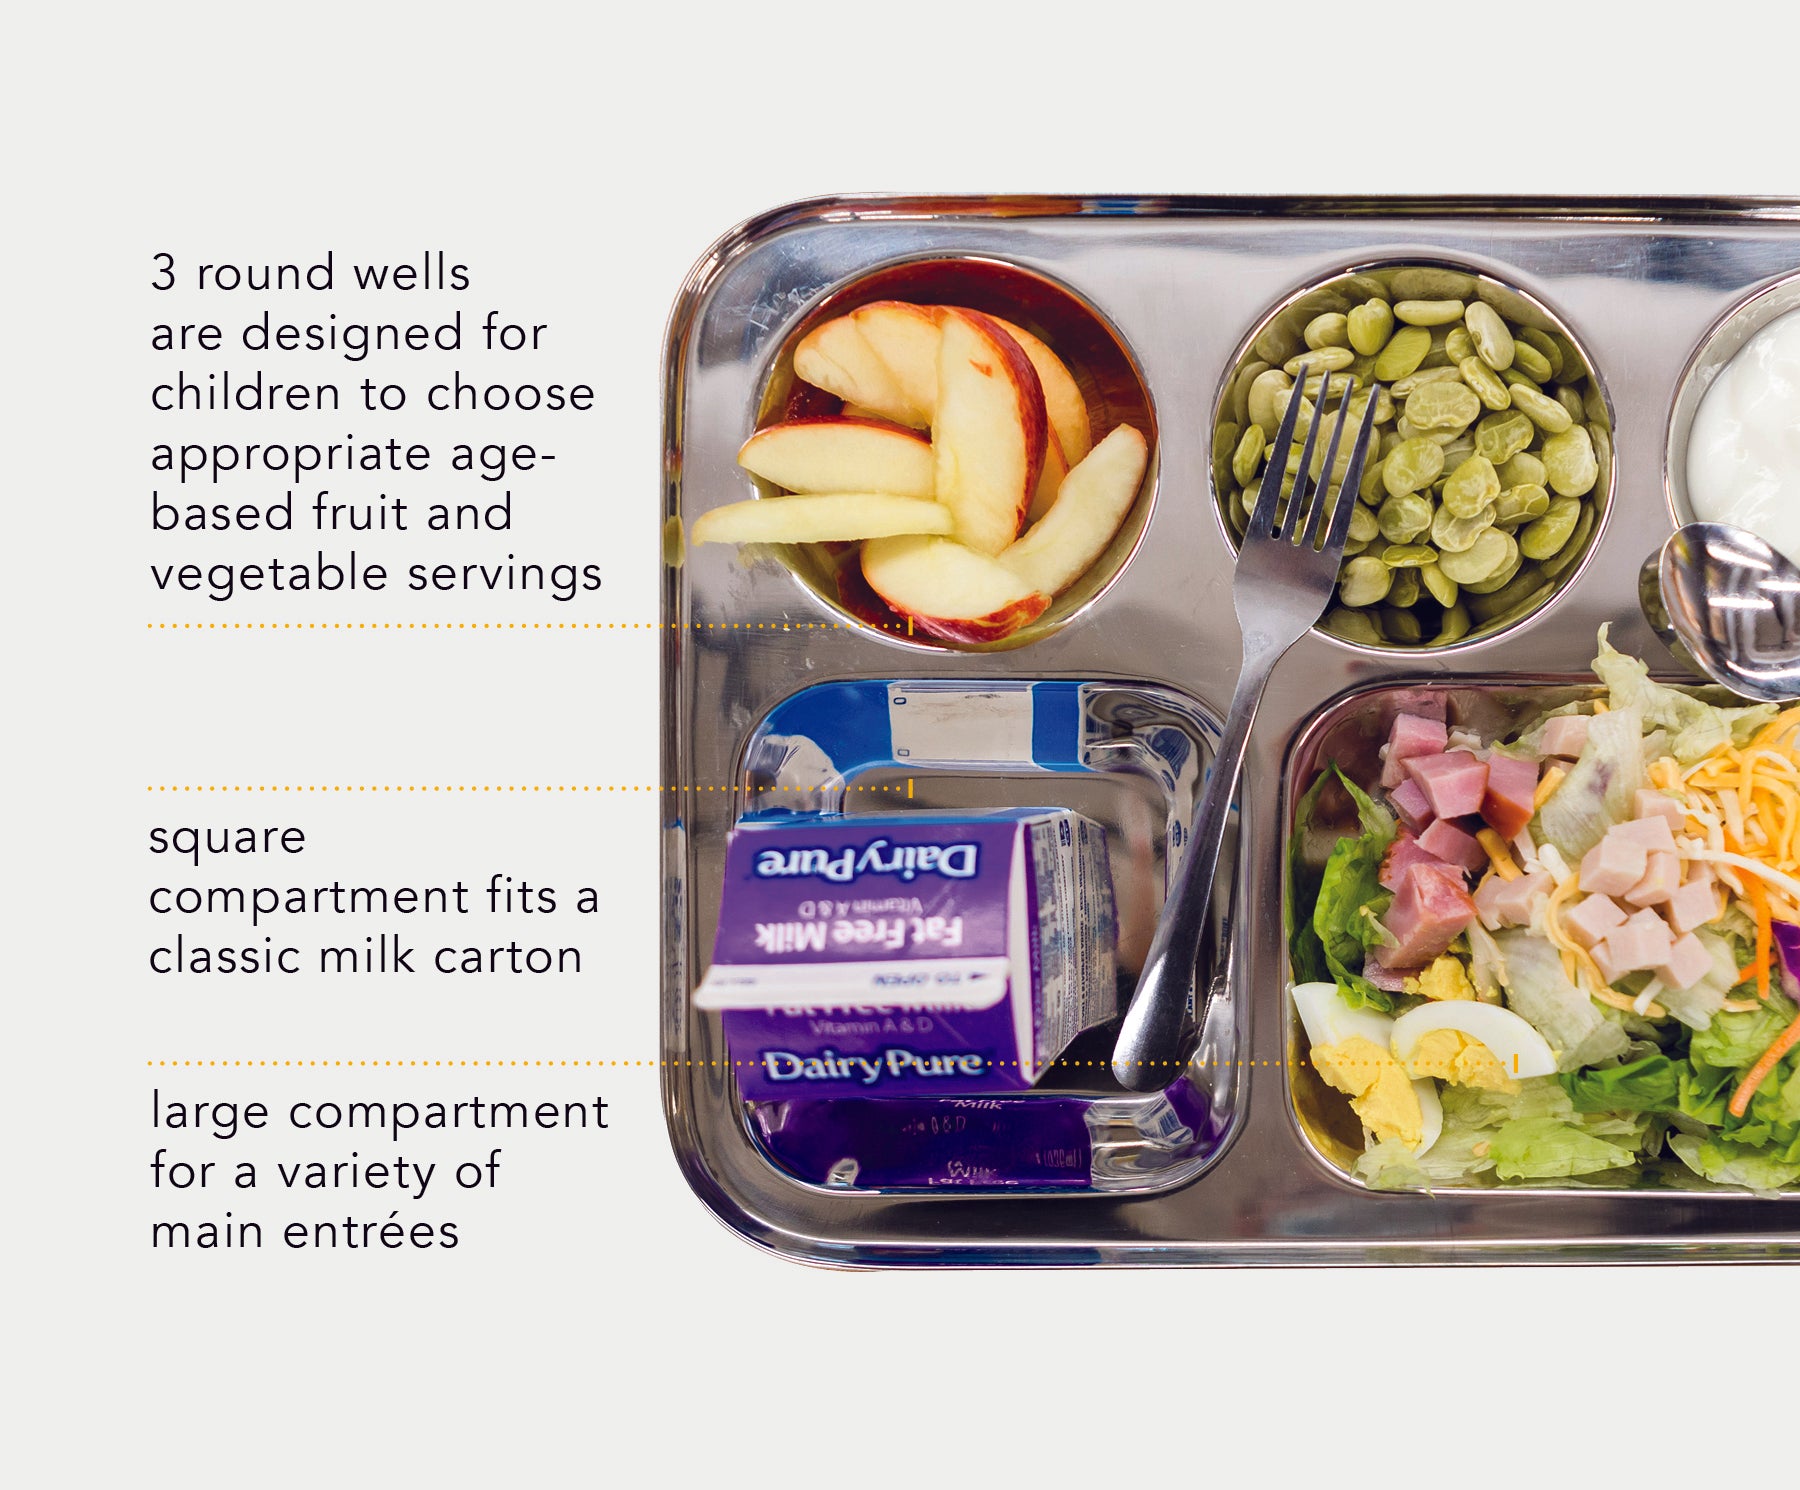 Ahimsa's stainless steel school cafeteria trays have 3 round wells are designed for children to choose appropriate age-based fruit and vegetable servings. square compartment fits a classic milk carton. large compartment for a variety of main entrées.